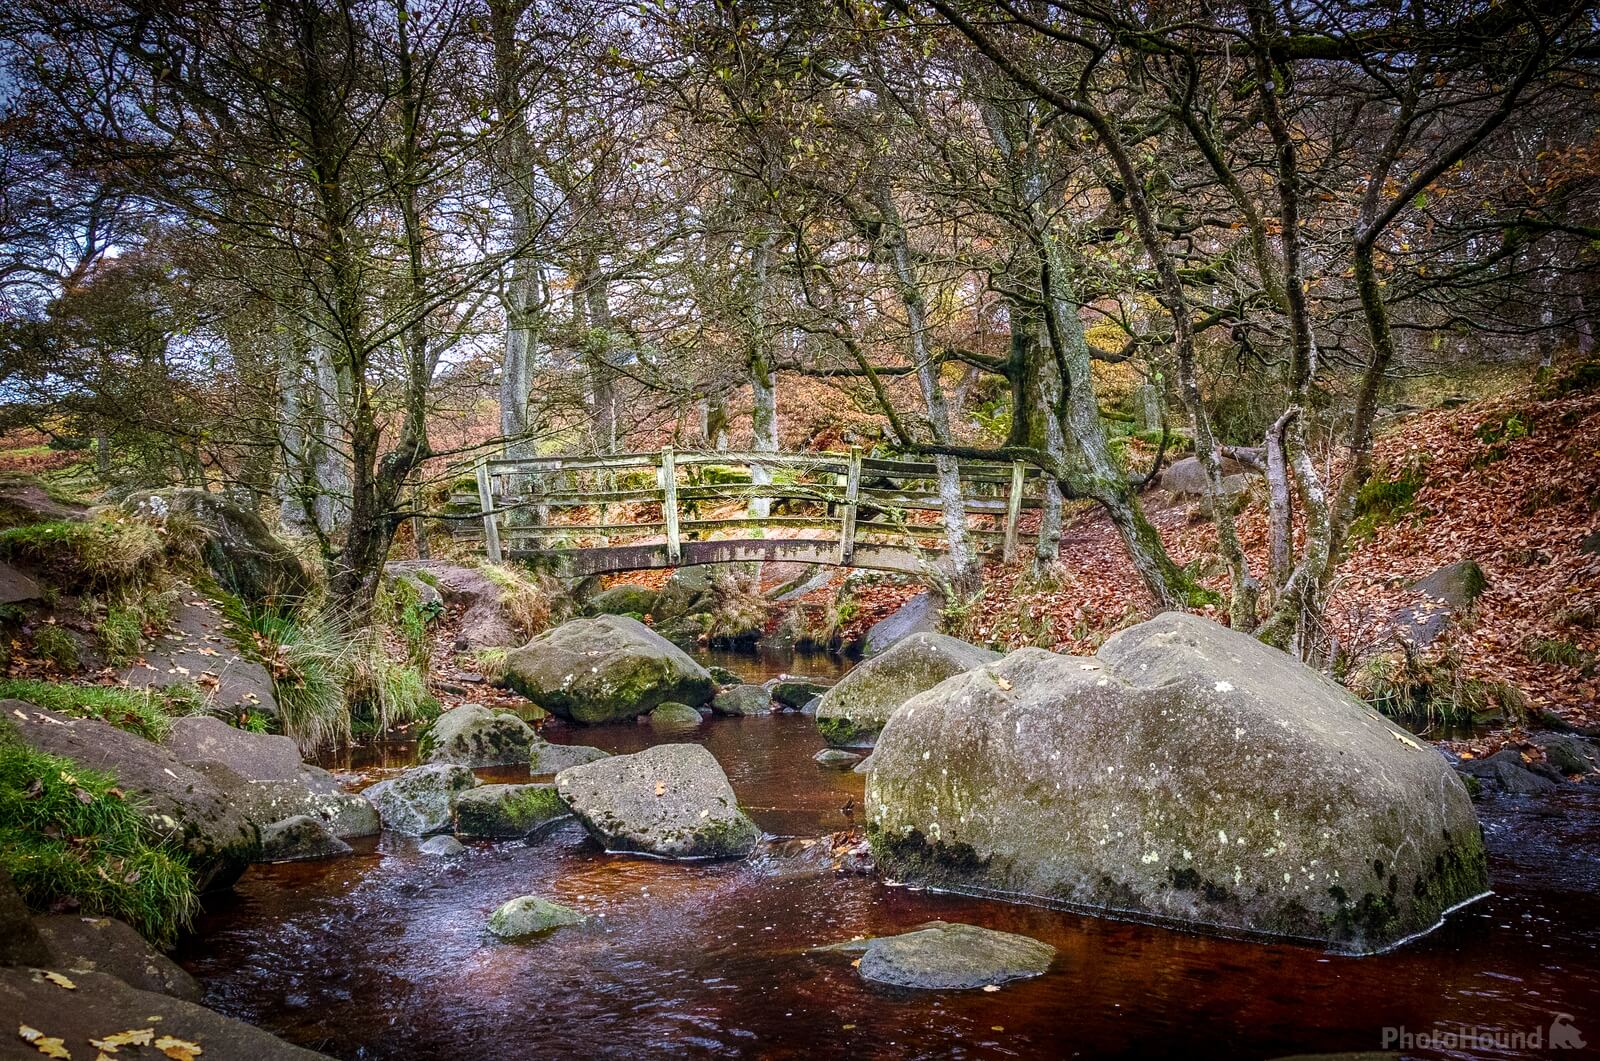 Image of Padley Gorge by Andy Killingbeck